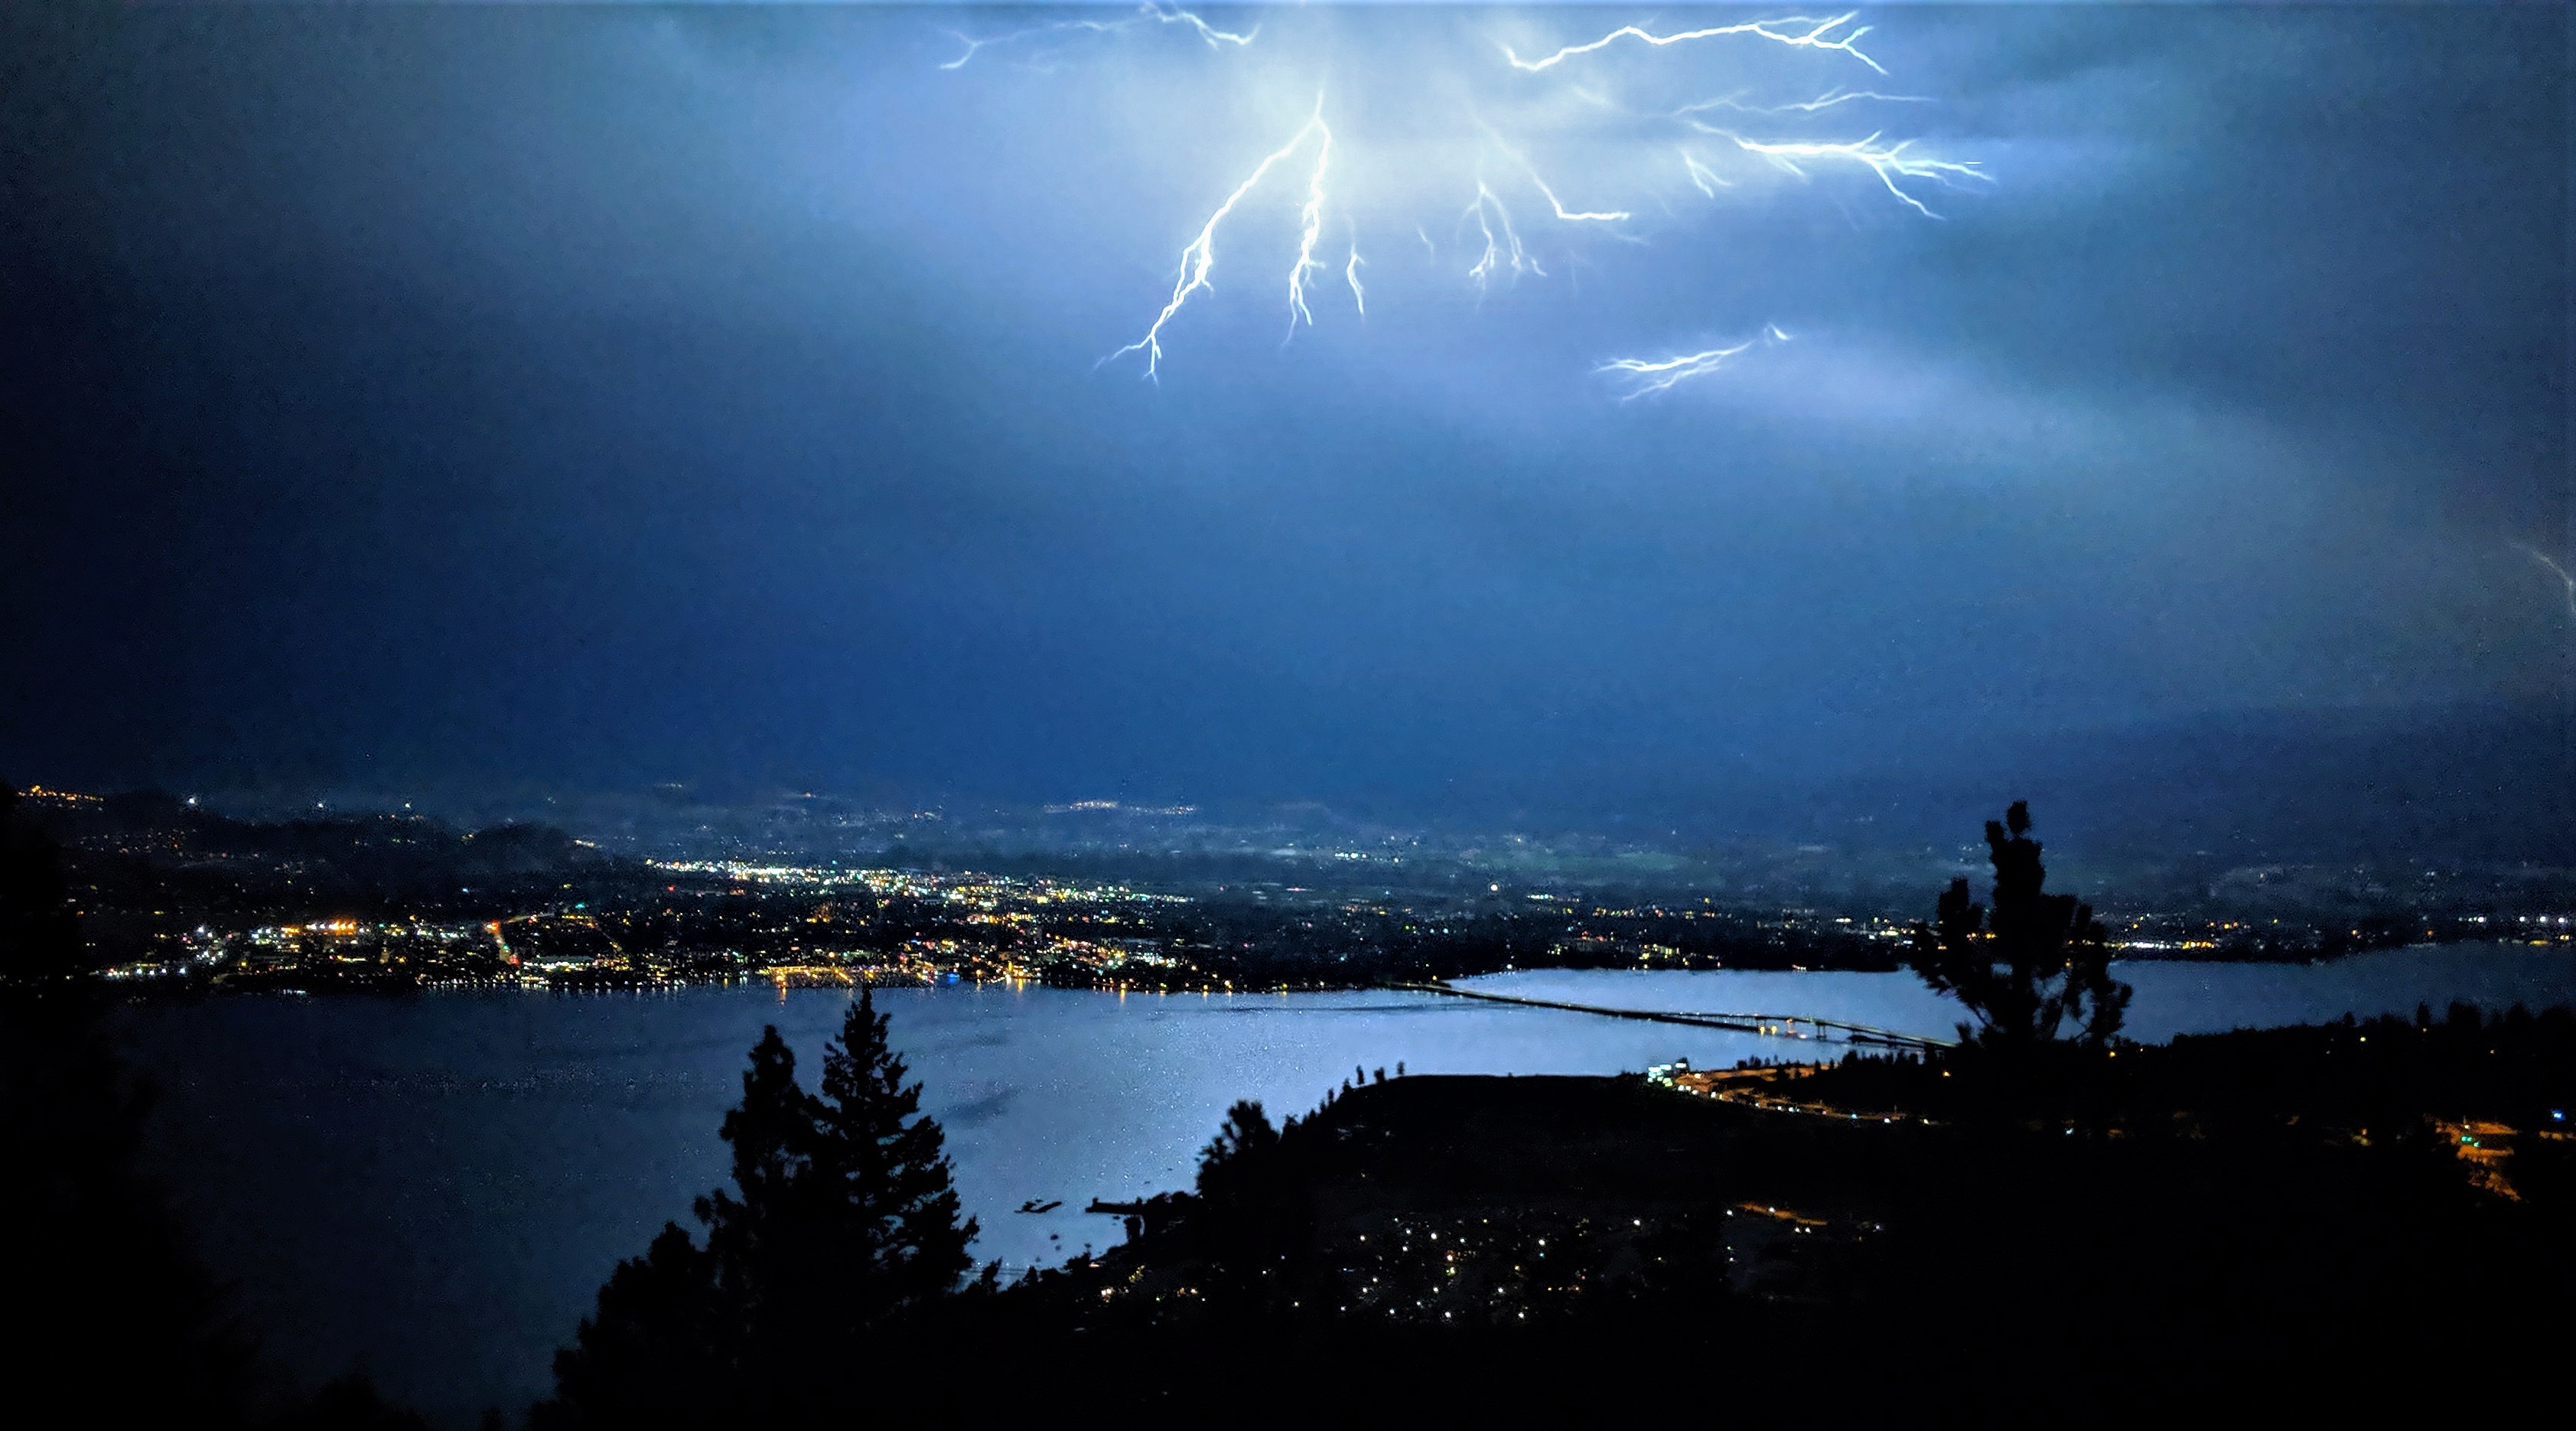 Severe thunderstorm watch issued for parts of Okanagan, Shuswap and
Thompson